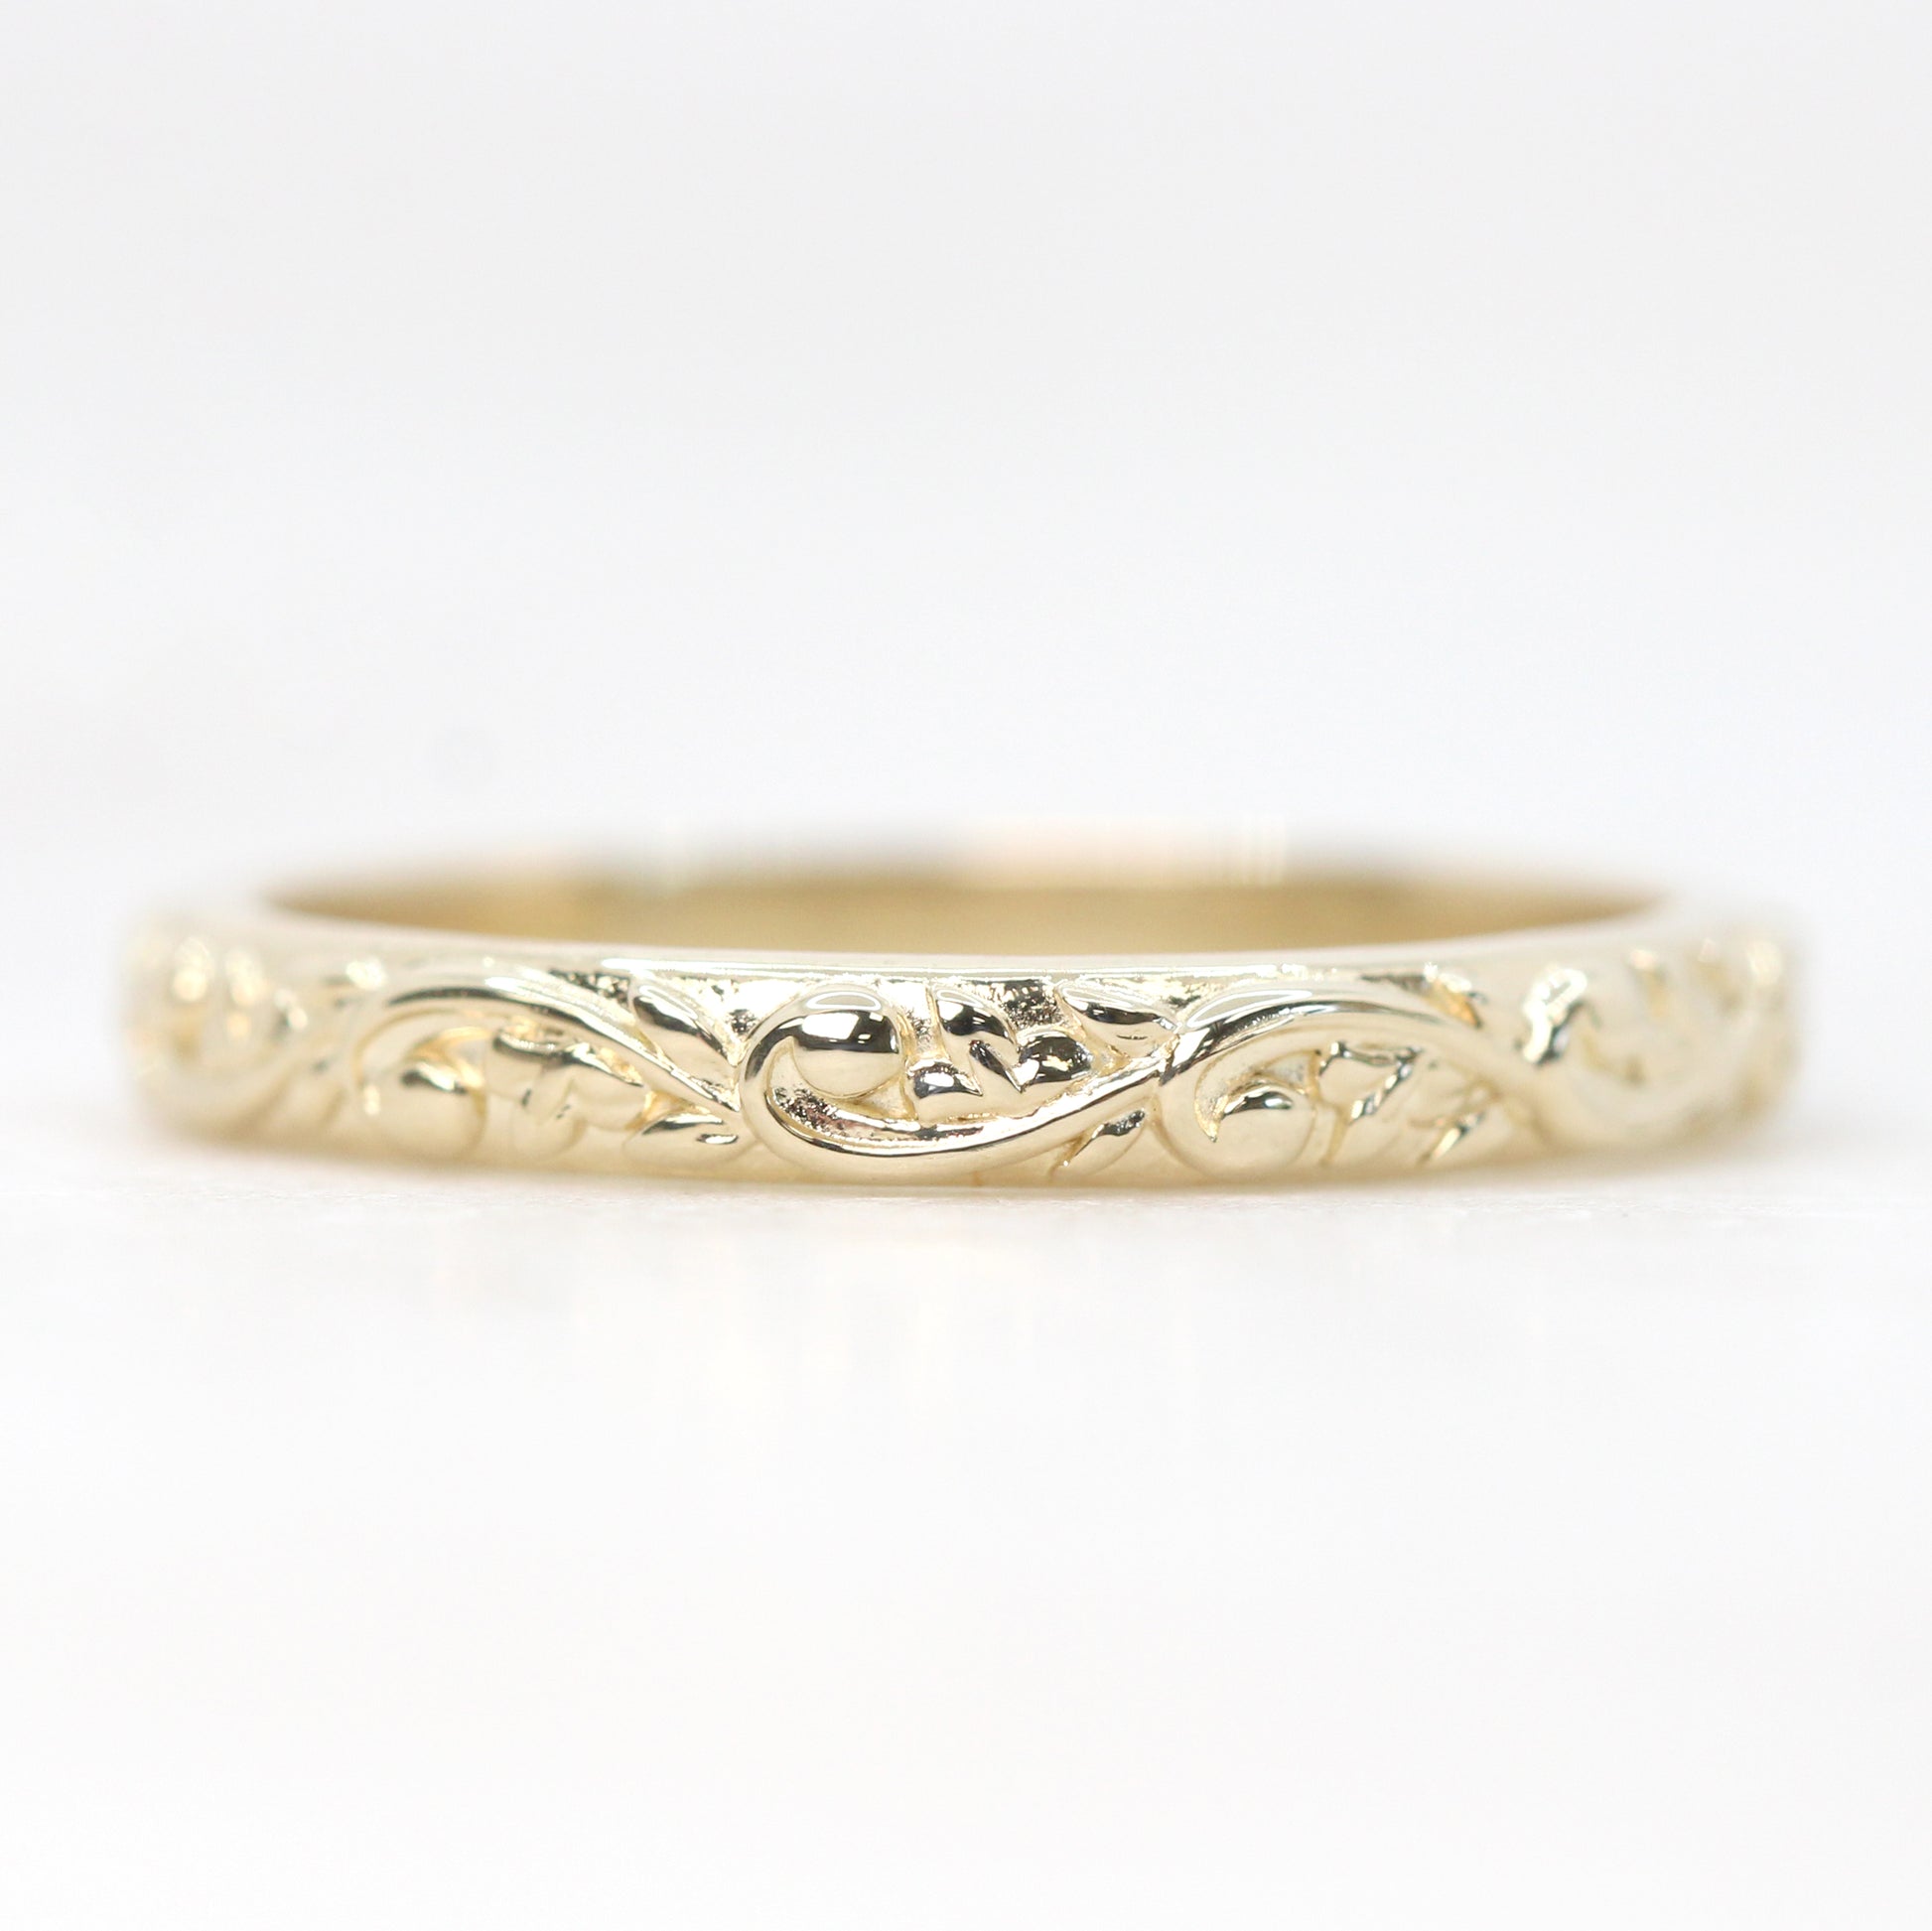 Samantha- (M) Bryce Band - Unisex Wedding Band - Made to Order, Choose Your Gold Tone - Midwinter Co. Alternative Bridal Rings and Modern Fine Jewelry